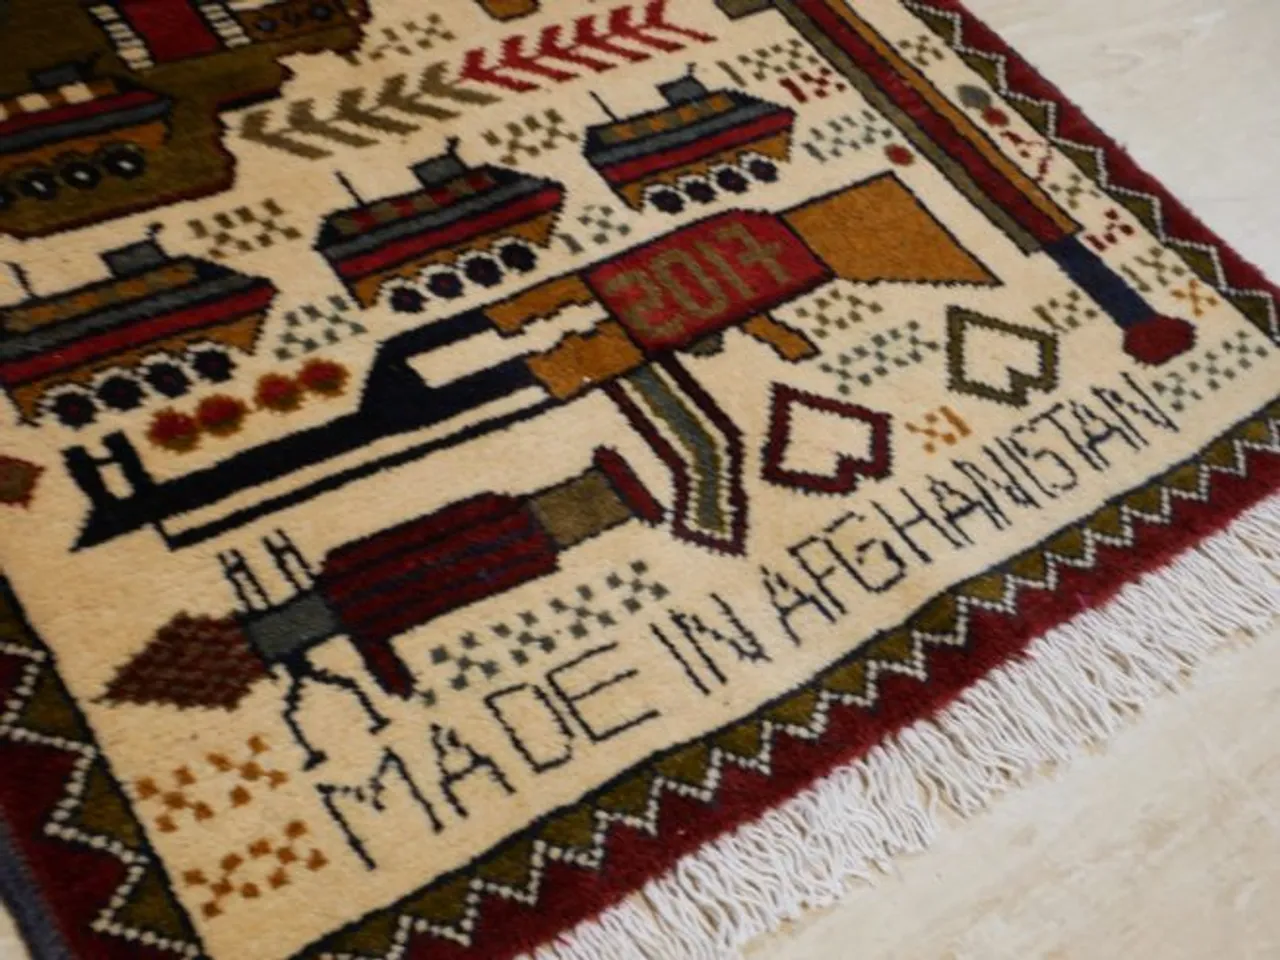 Afghan Women’s 'War Rugs' Evident Of A Disheartening Reality